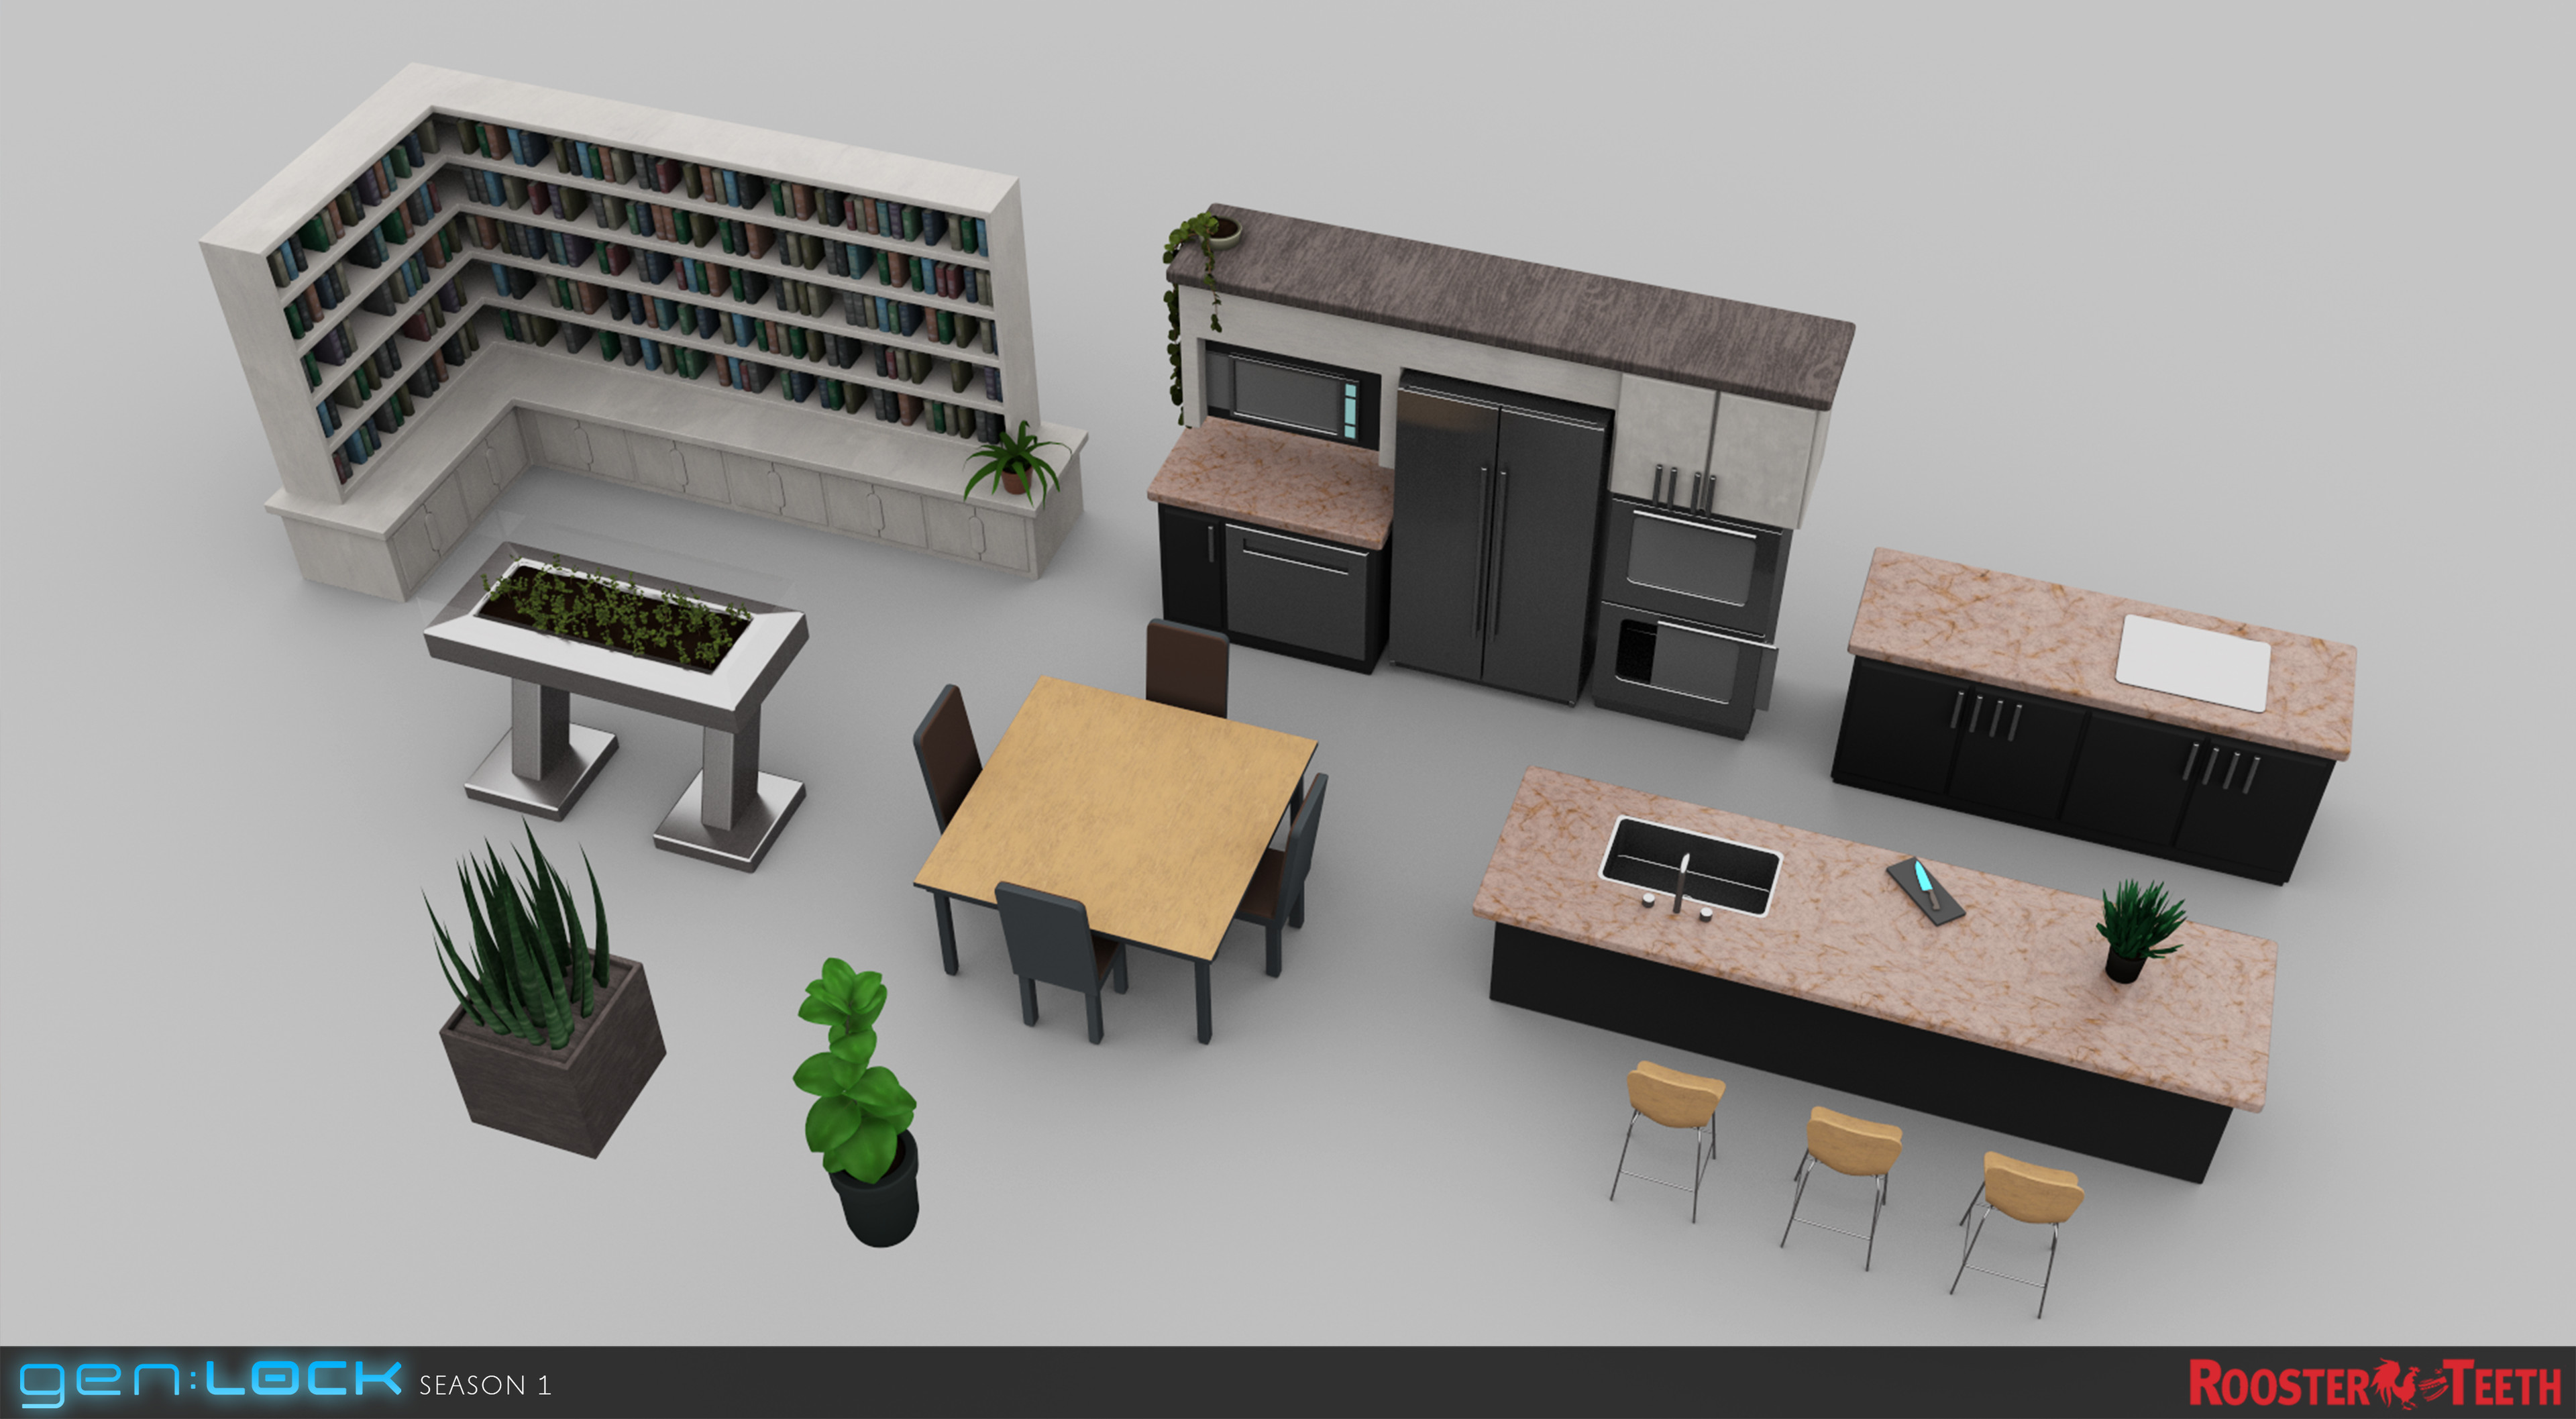 Some of the modeled and textured apartment props.